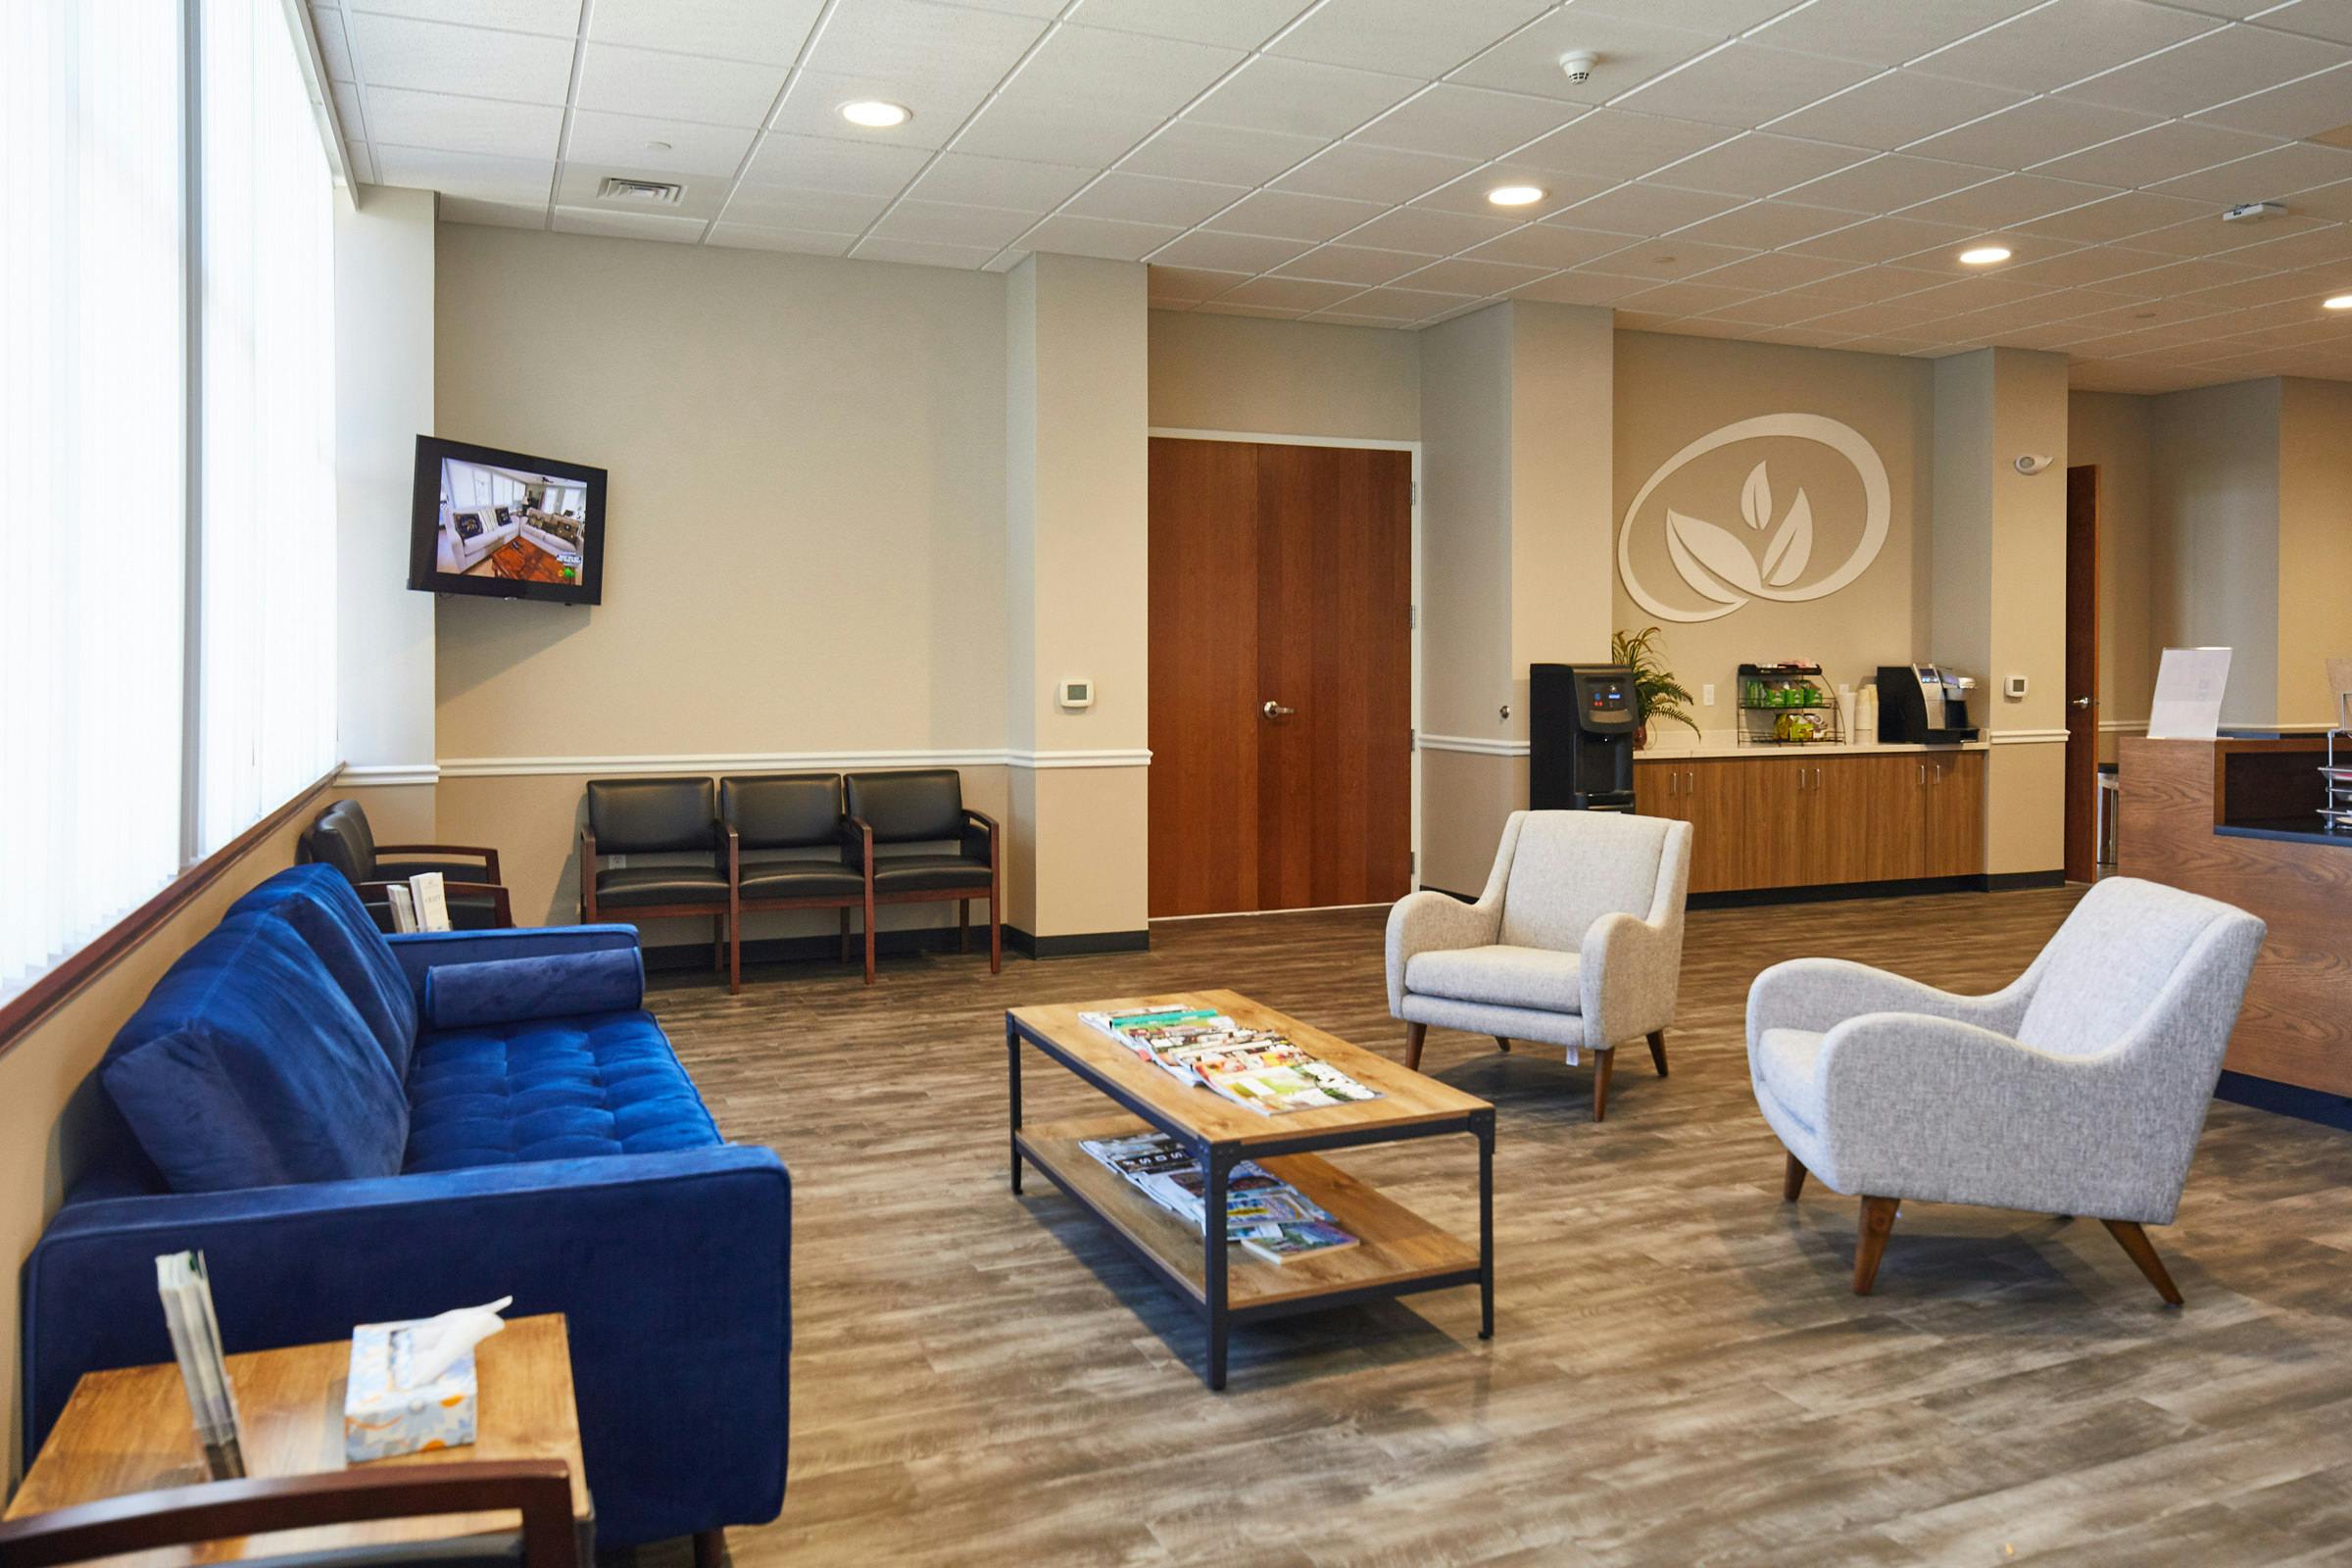 Location photography for Center for Integrated Behavioral Health